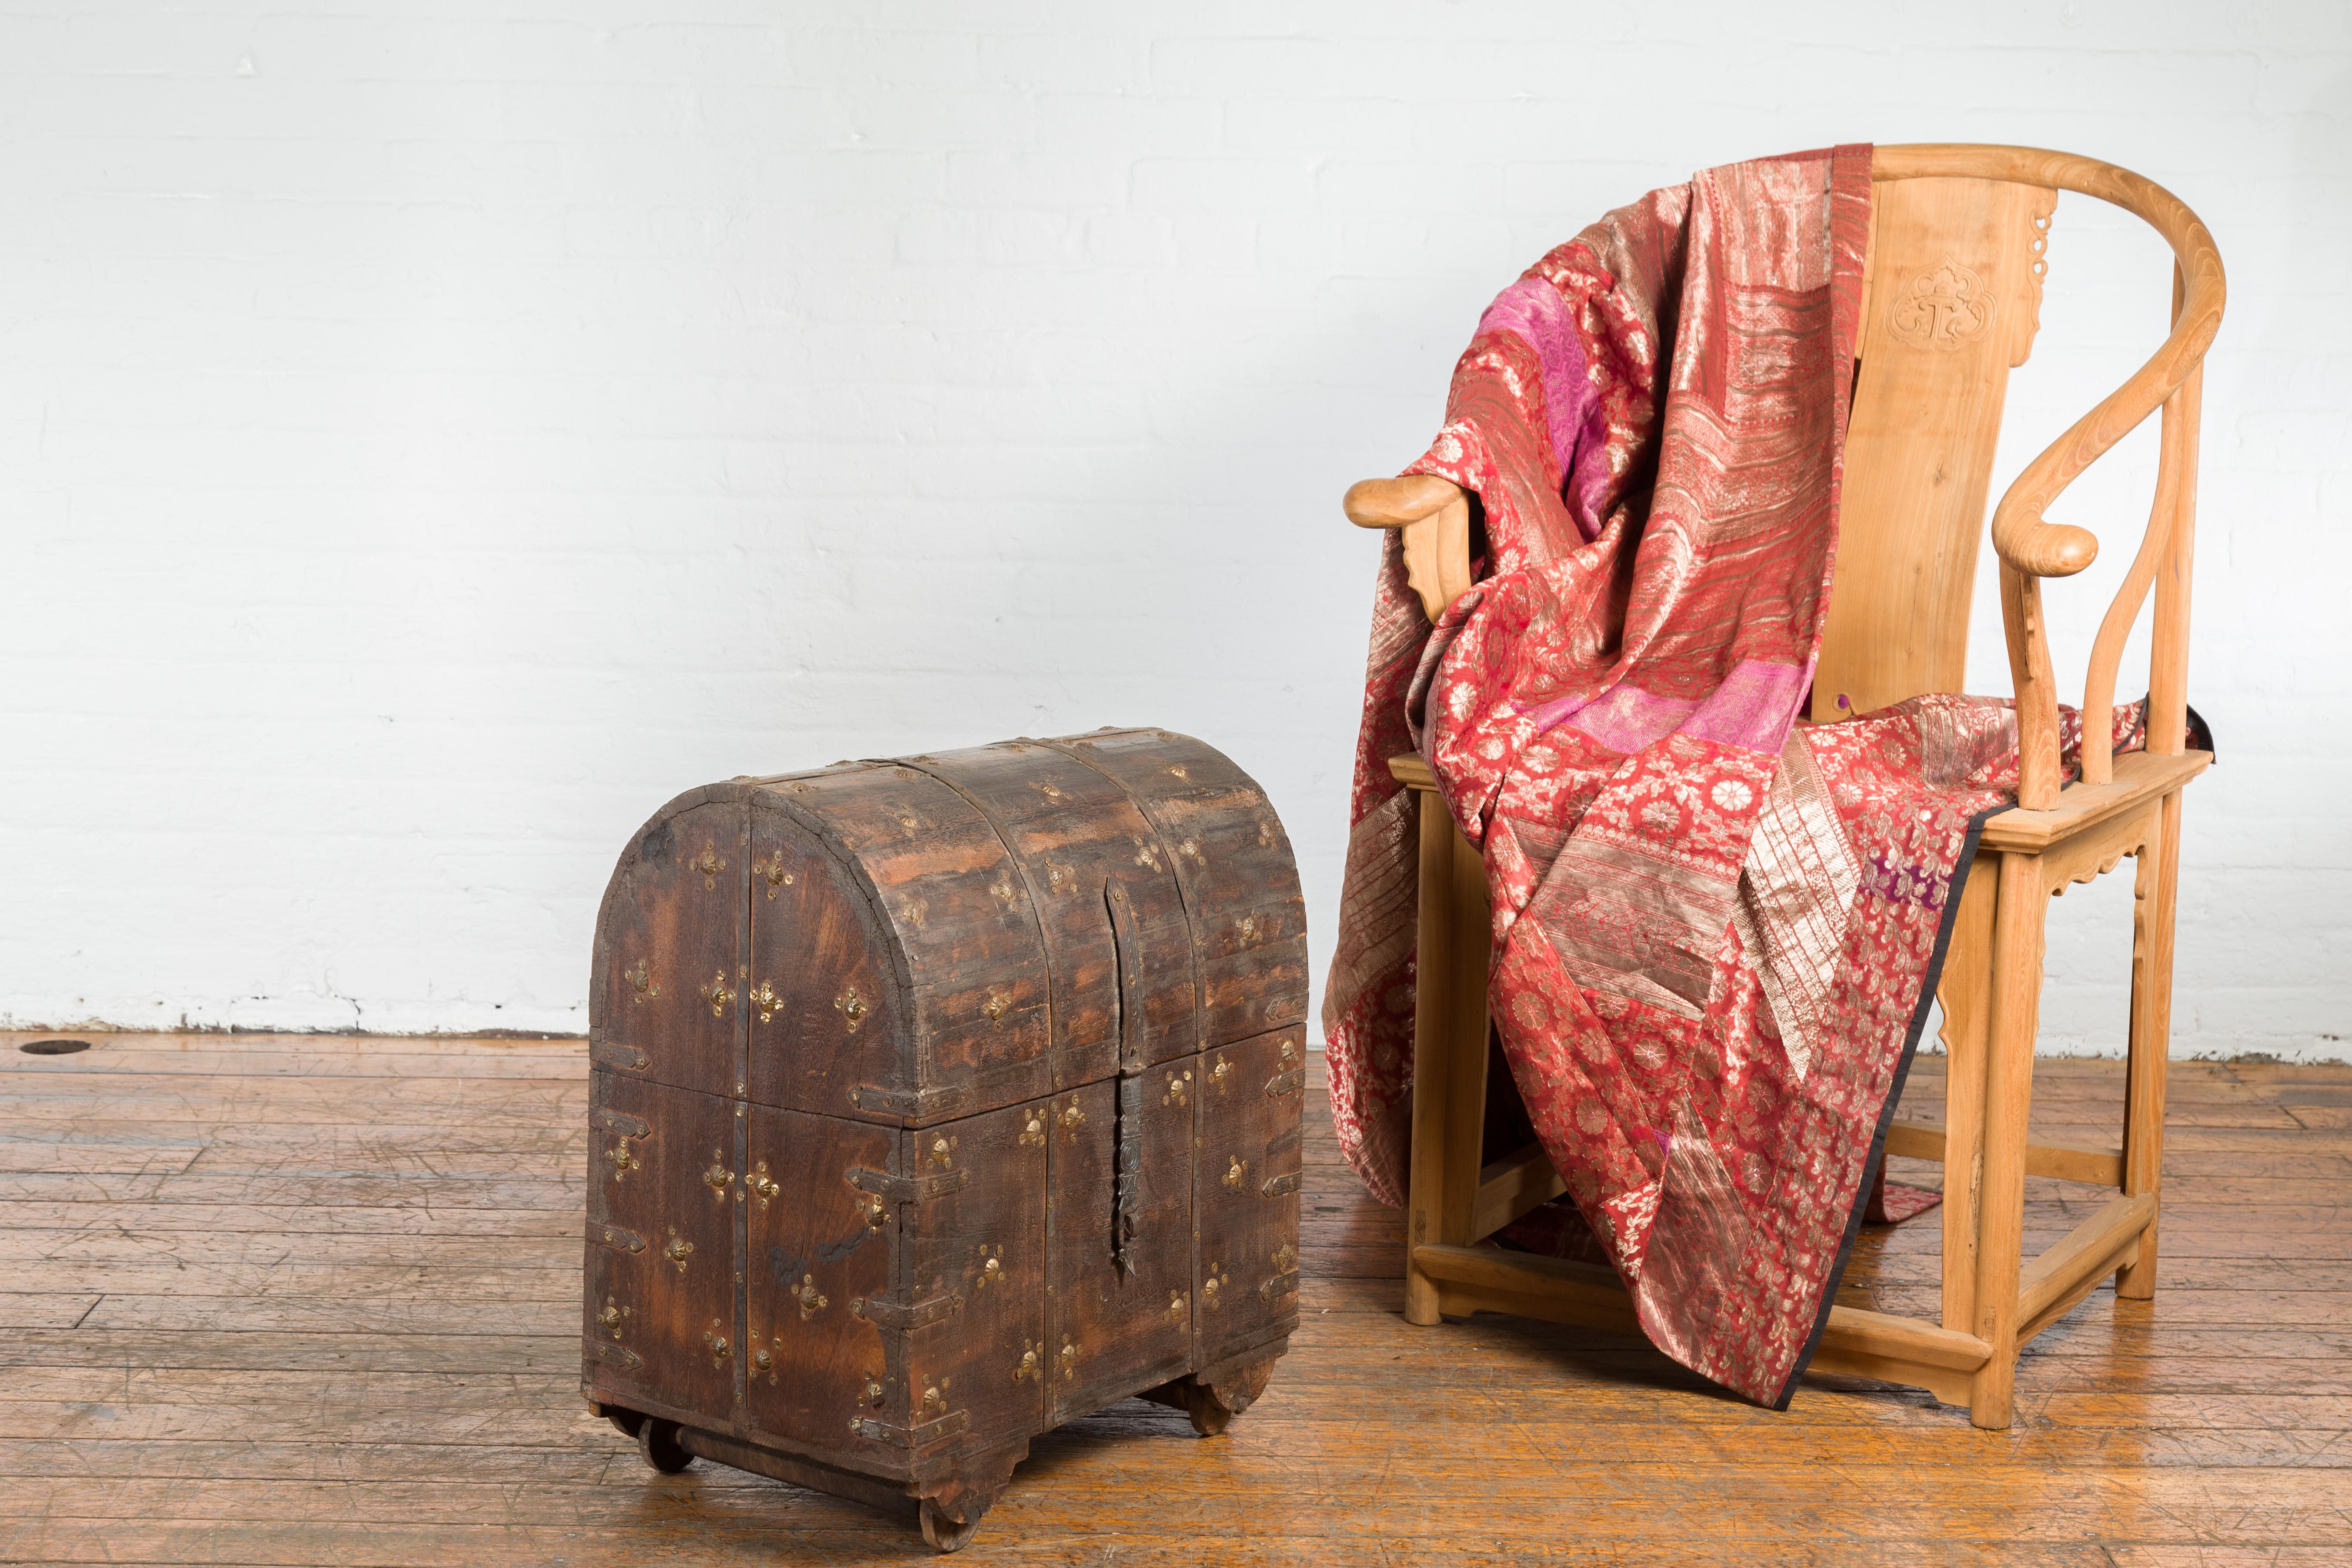 Indian antique wooden treasure chest from the 19th century, with dome top, metal accents and petite wheels. Created in India during the 19th century, this treasure chest captures our attention with its distressed wooden structure accented with